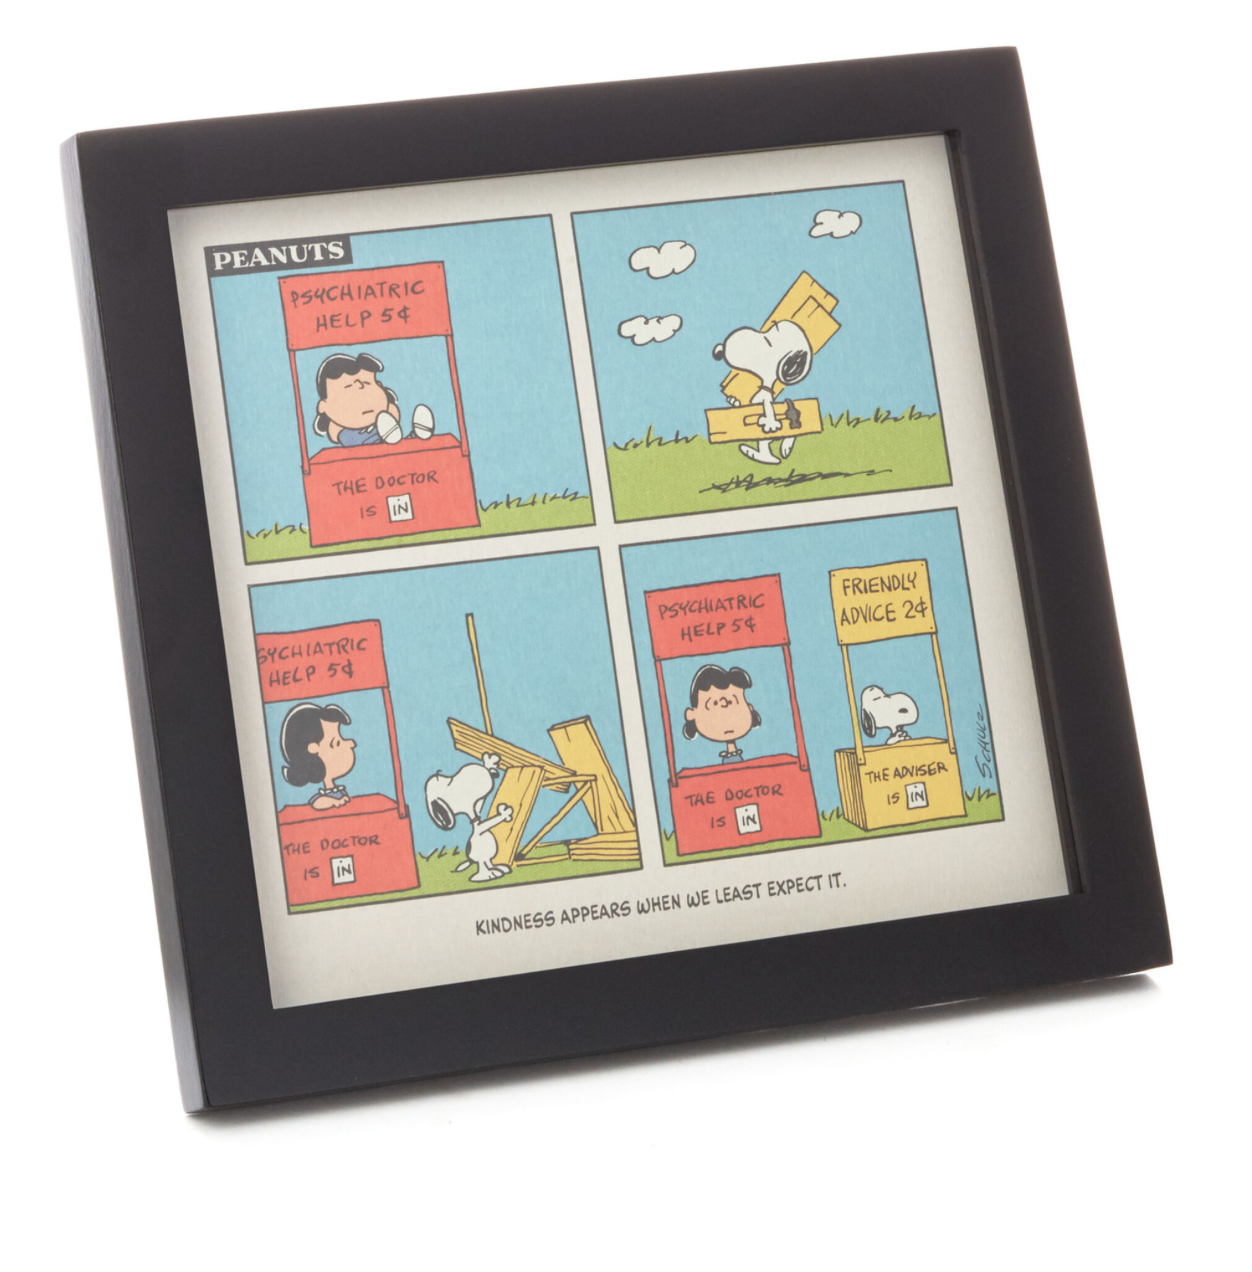 Hallmark Peanuts Lucy and Snoopy Kindness Cartoon Framed Art Quoted Sign New